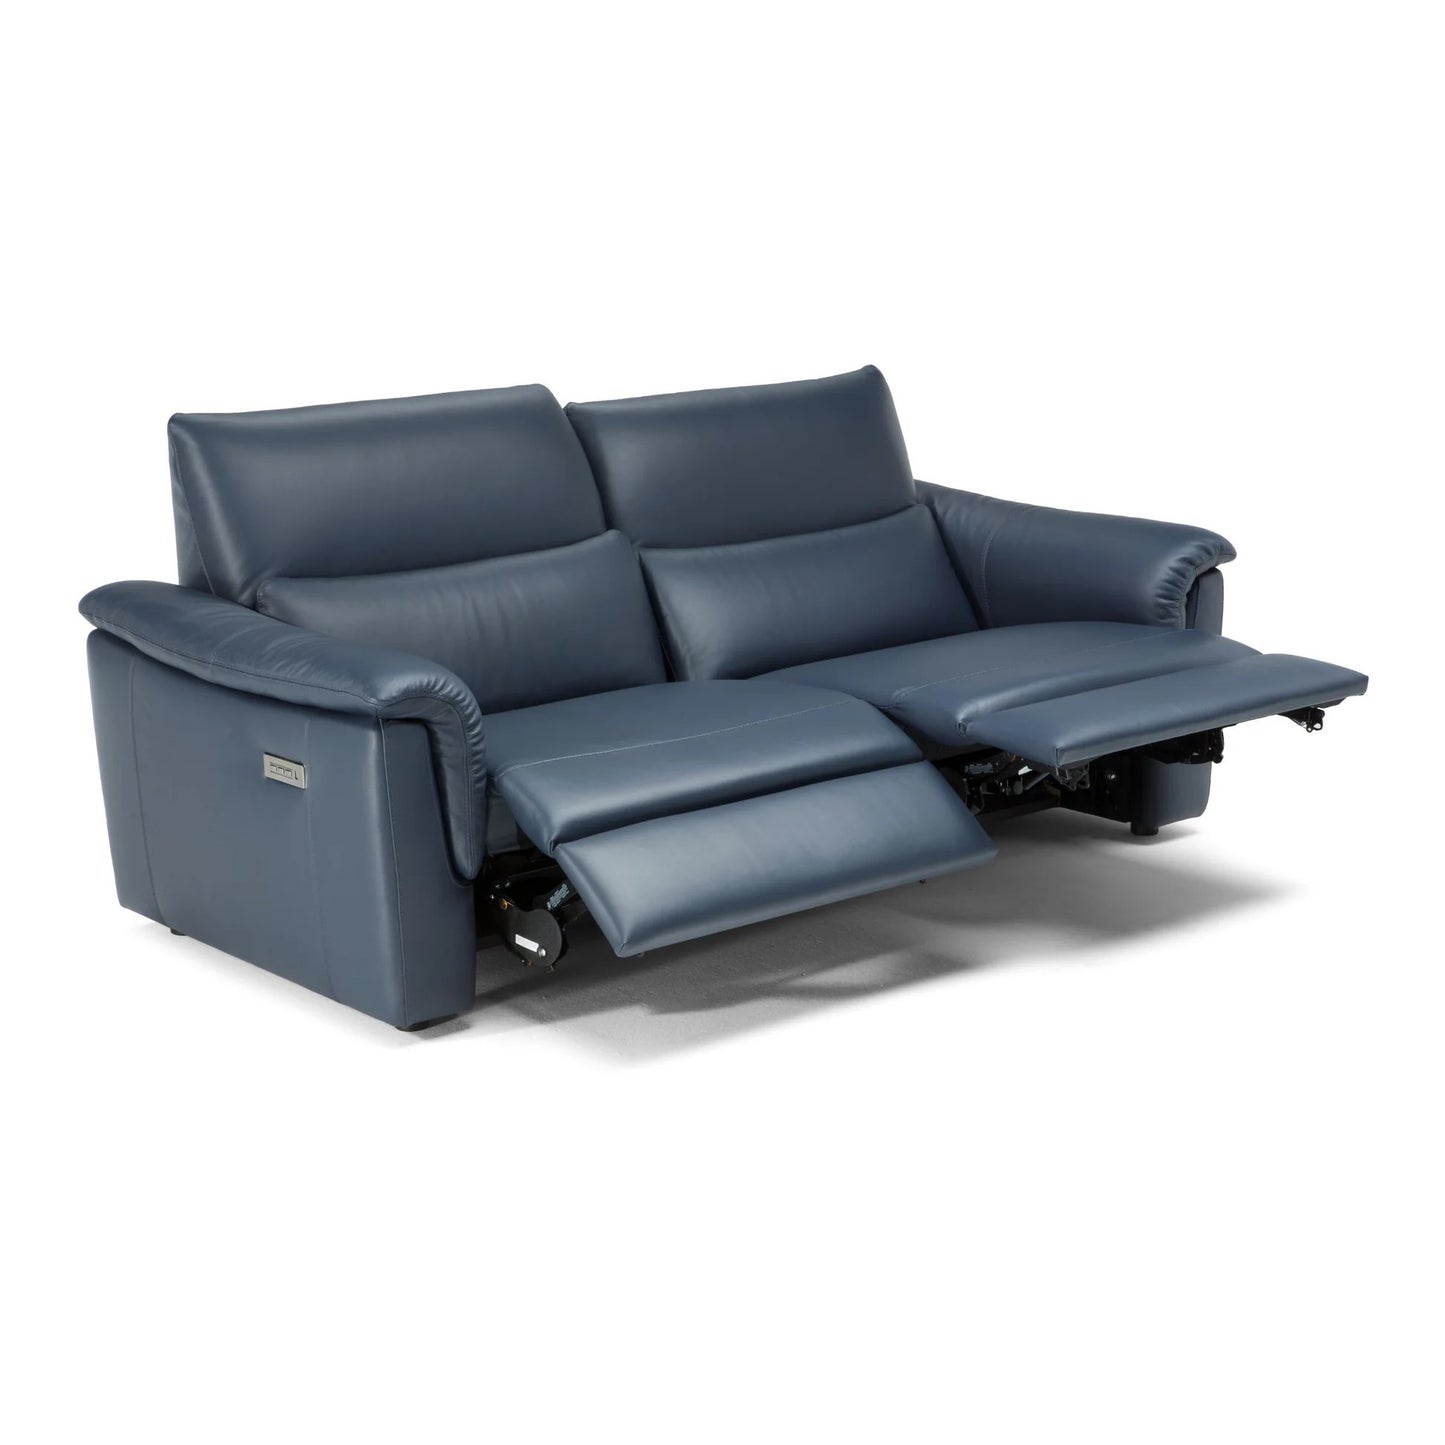 Natuzzi Editions Amorevole C176 Reclining Modular Sofa. Available from your Natuzzi Stockist Make Your House A Home, Bendigo, Victoria. Australia wide delivery to Melbourne. Italian leather.